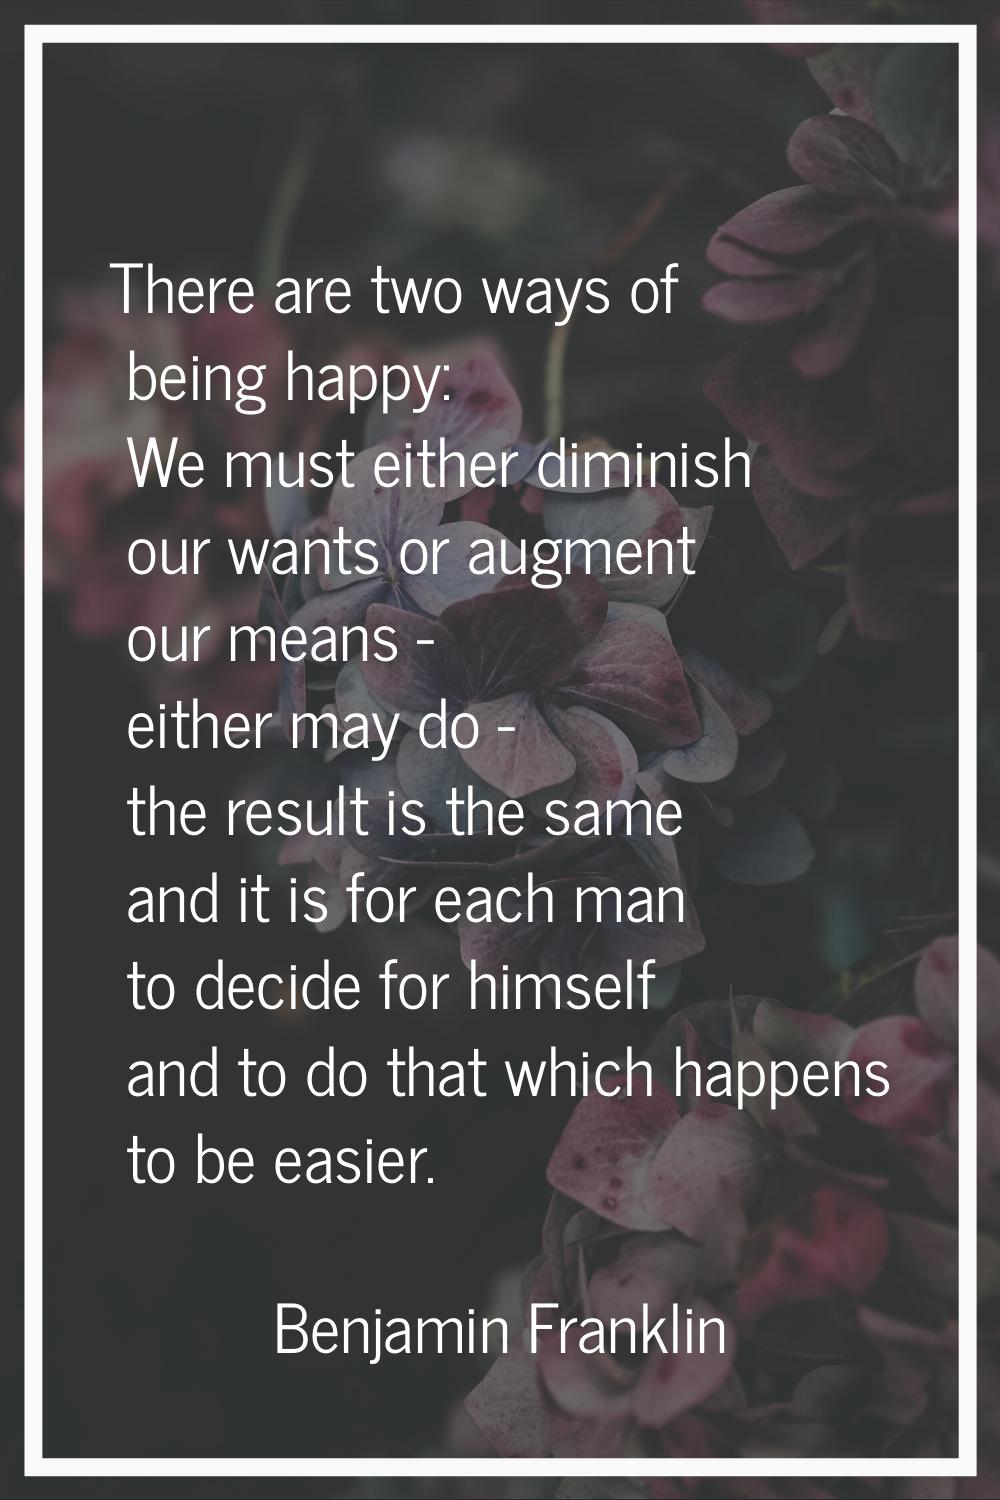 There are two ways of being happy: We must either diminish our wants or augment our means - either 